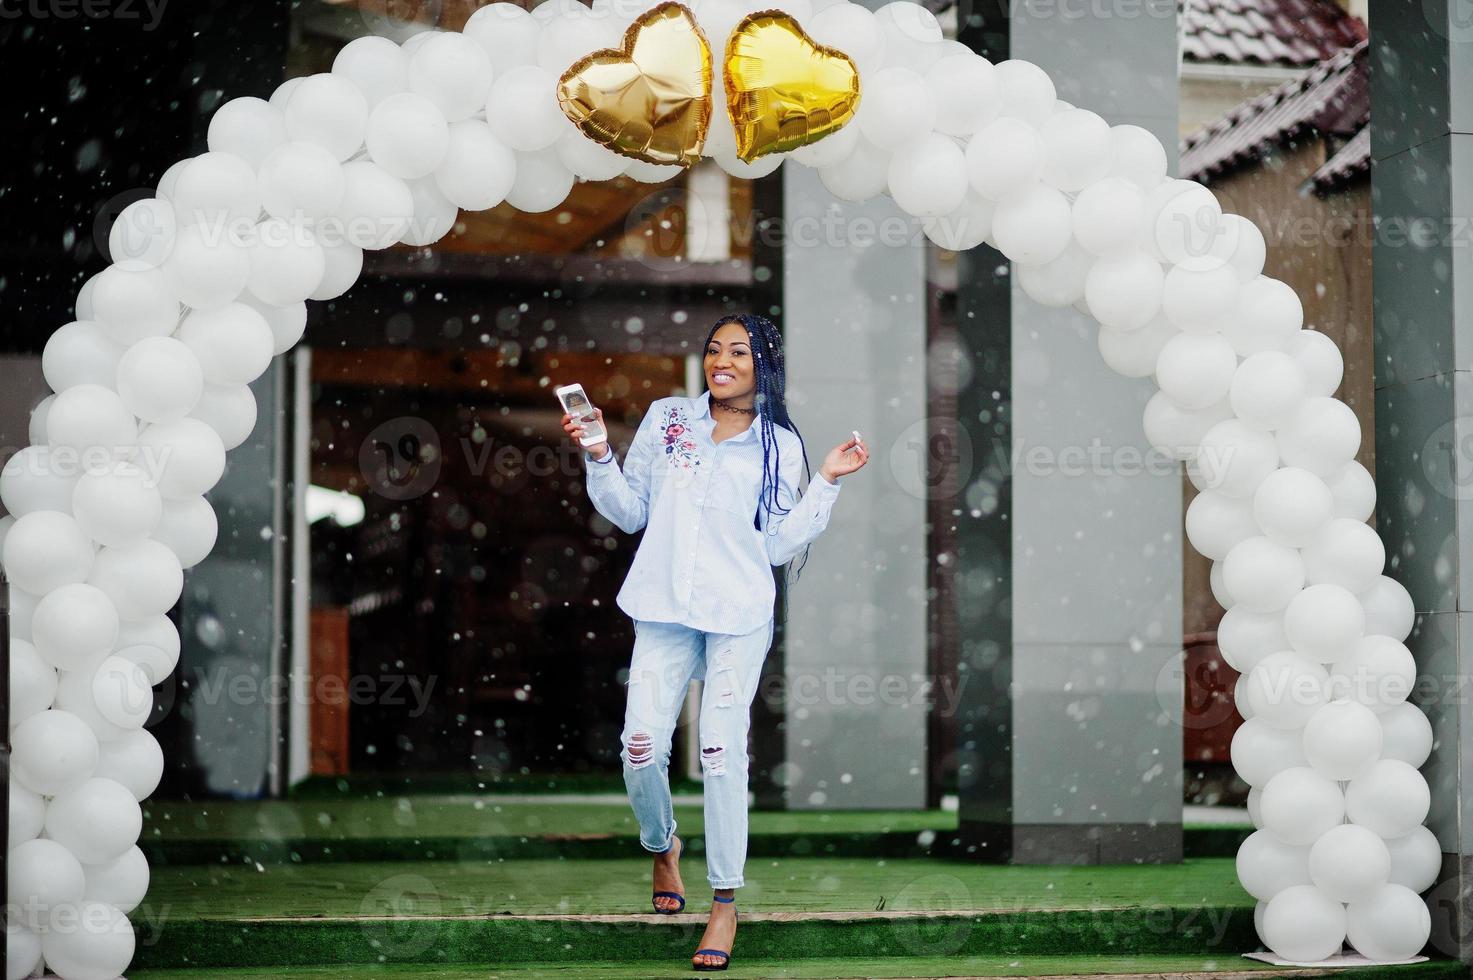 Stylish african american girl with dreads holding mobile phone at hand, outdoor against arch of balloons at snowy weather. photo